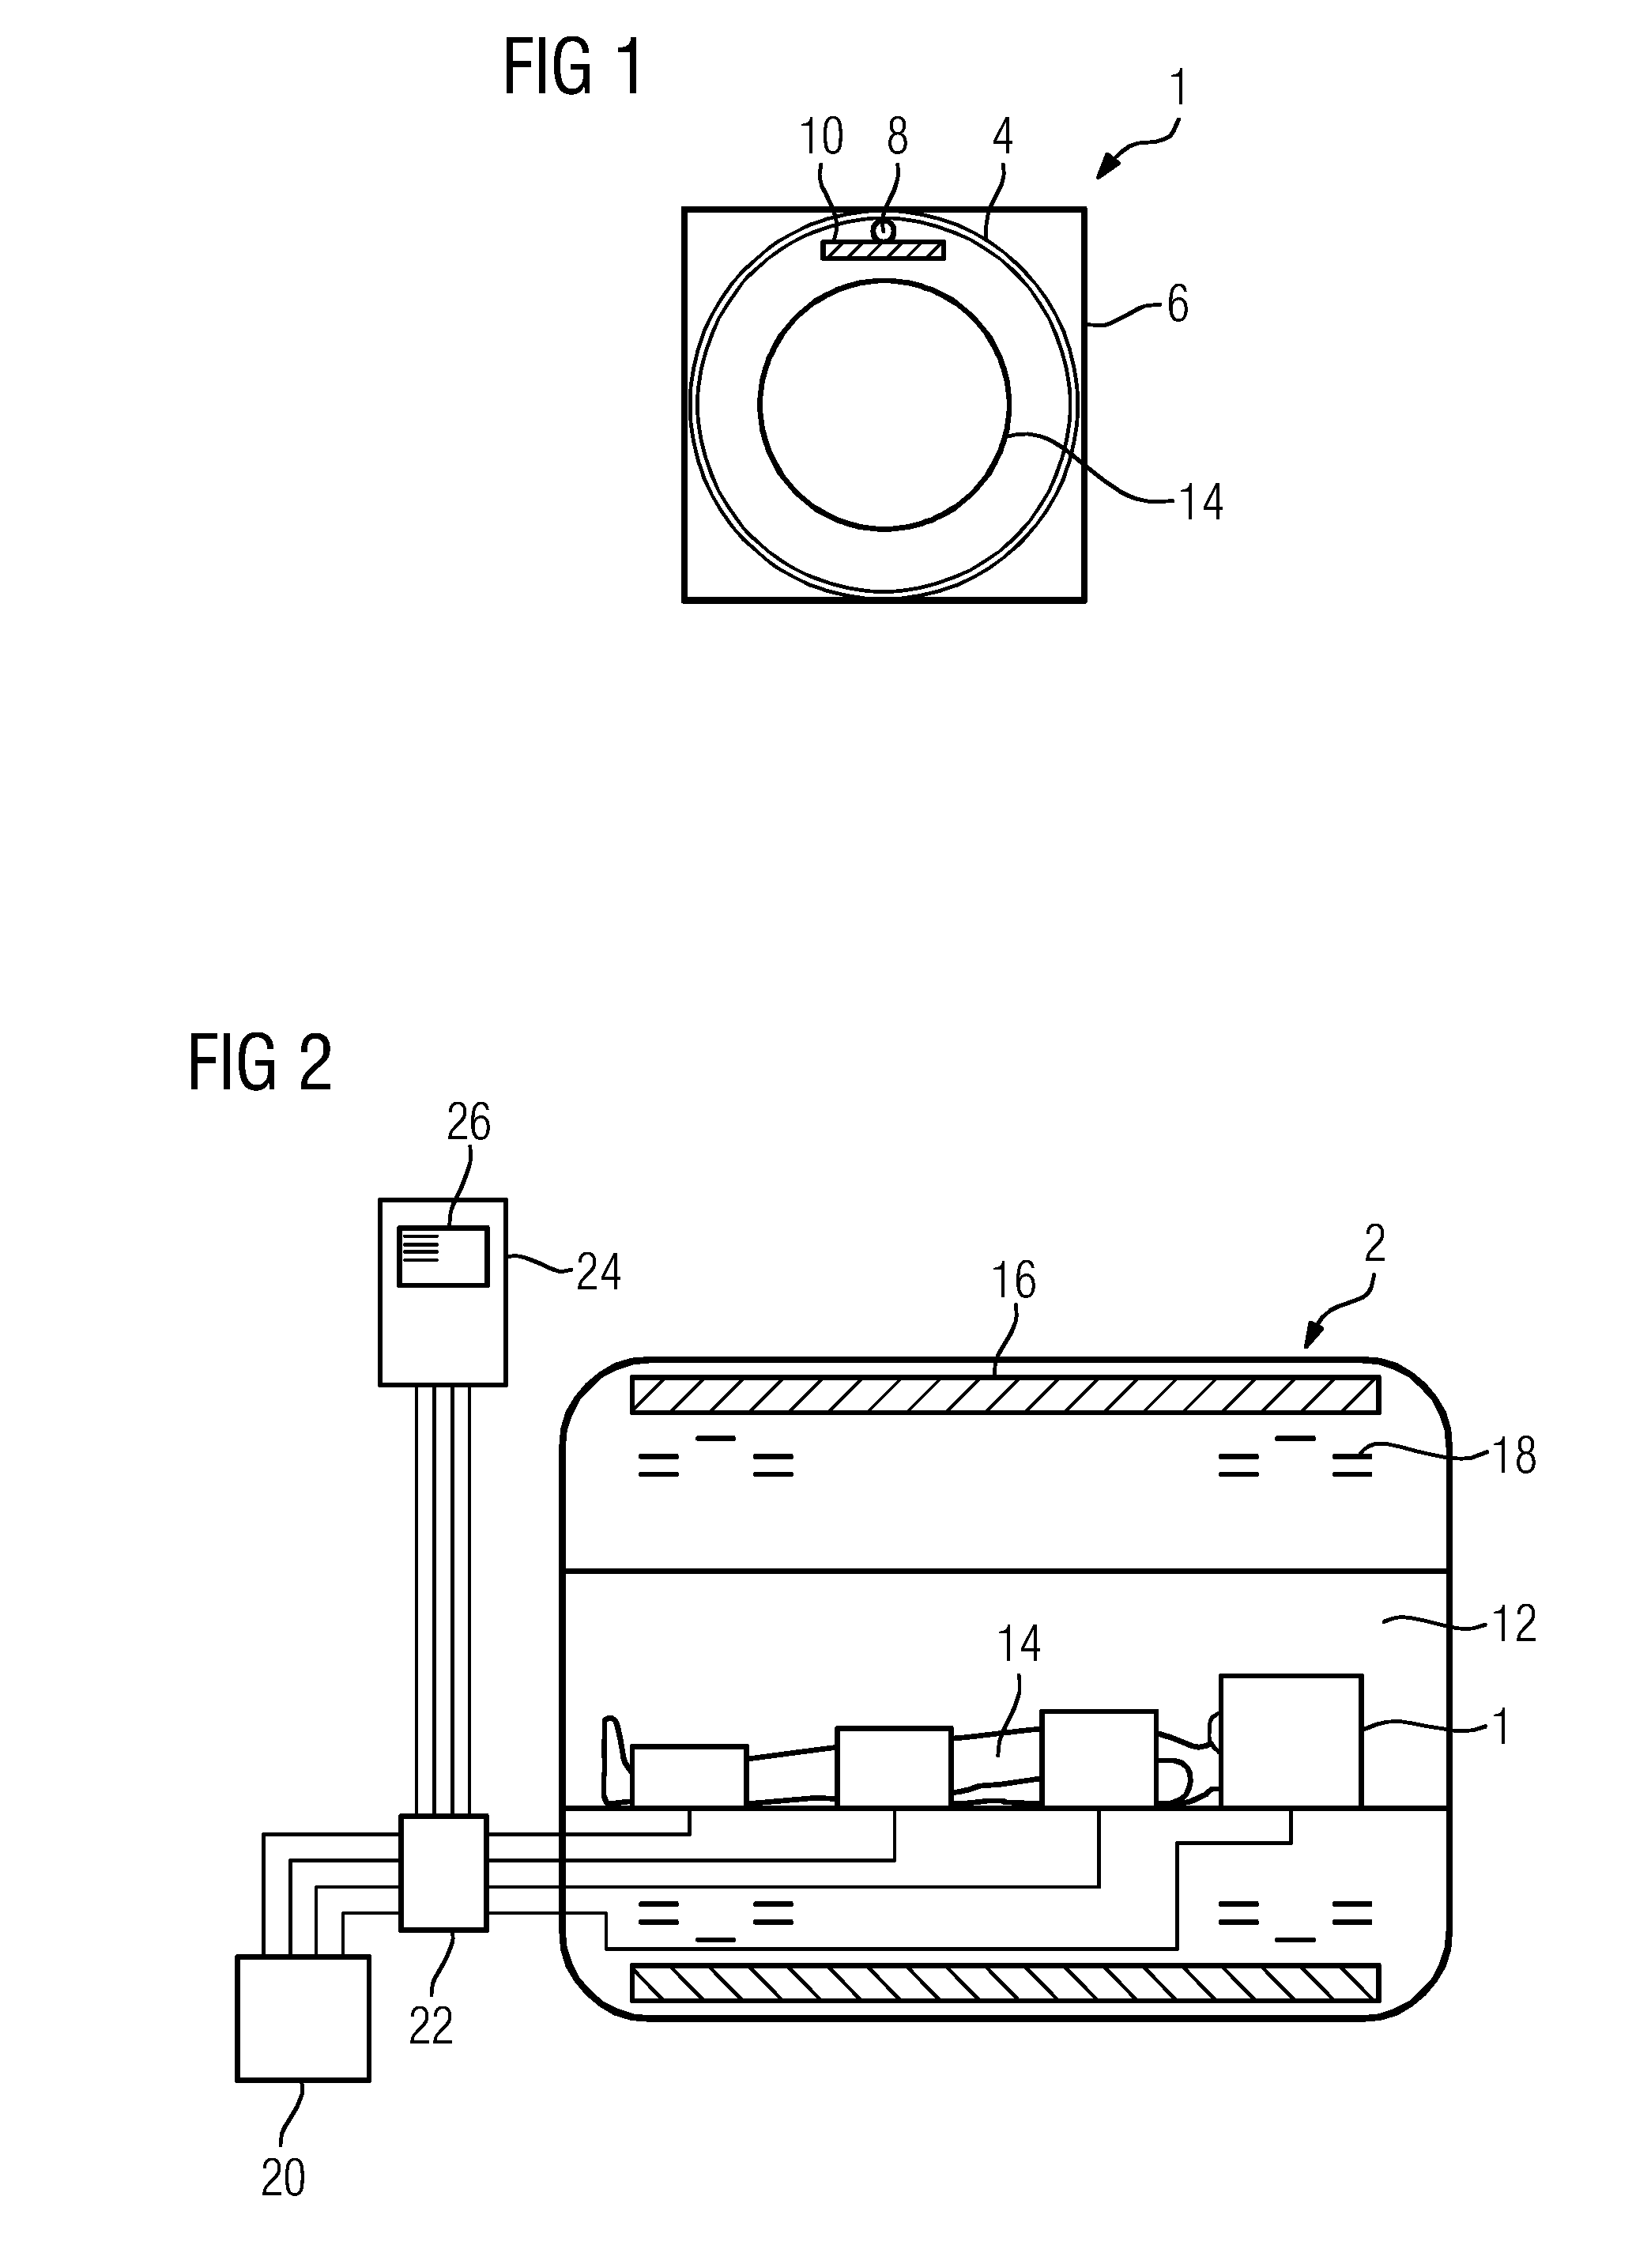 Local Coil for a Coil System of a Magnetic Resonance Imaging System